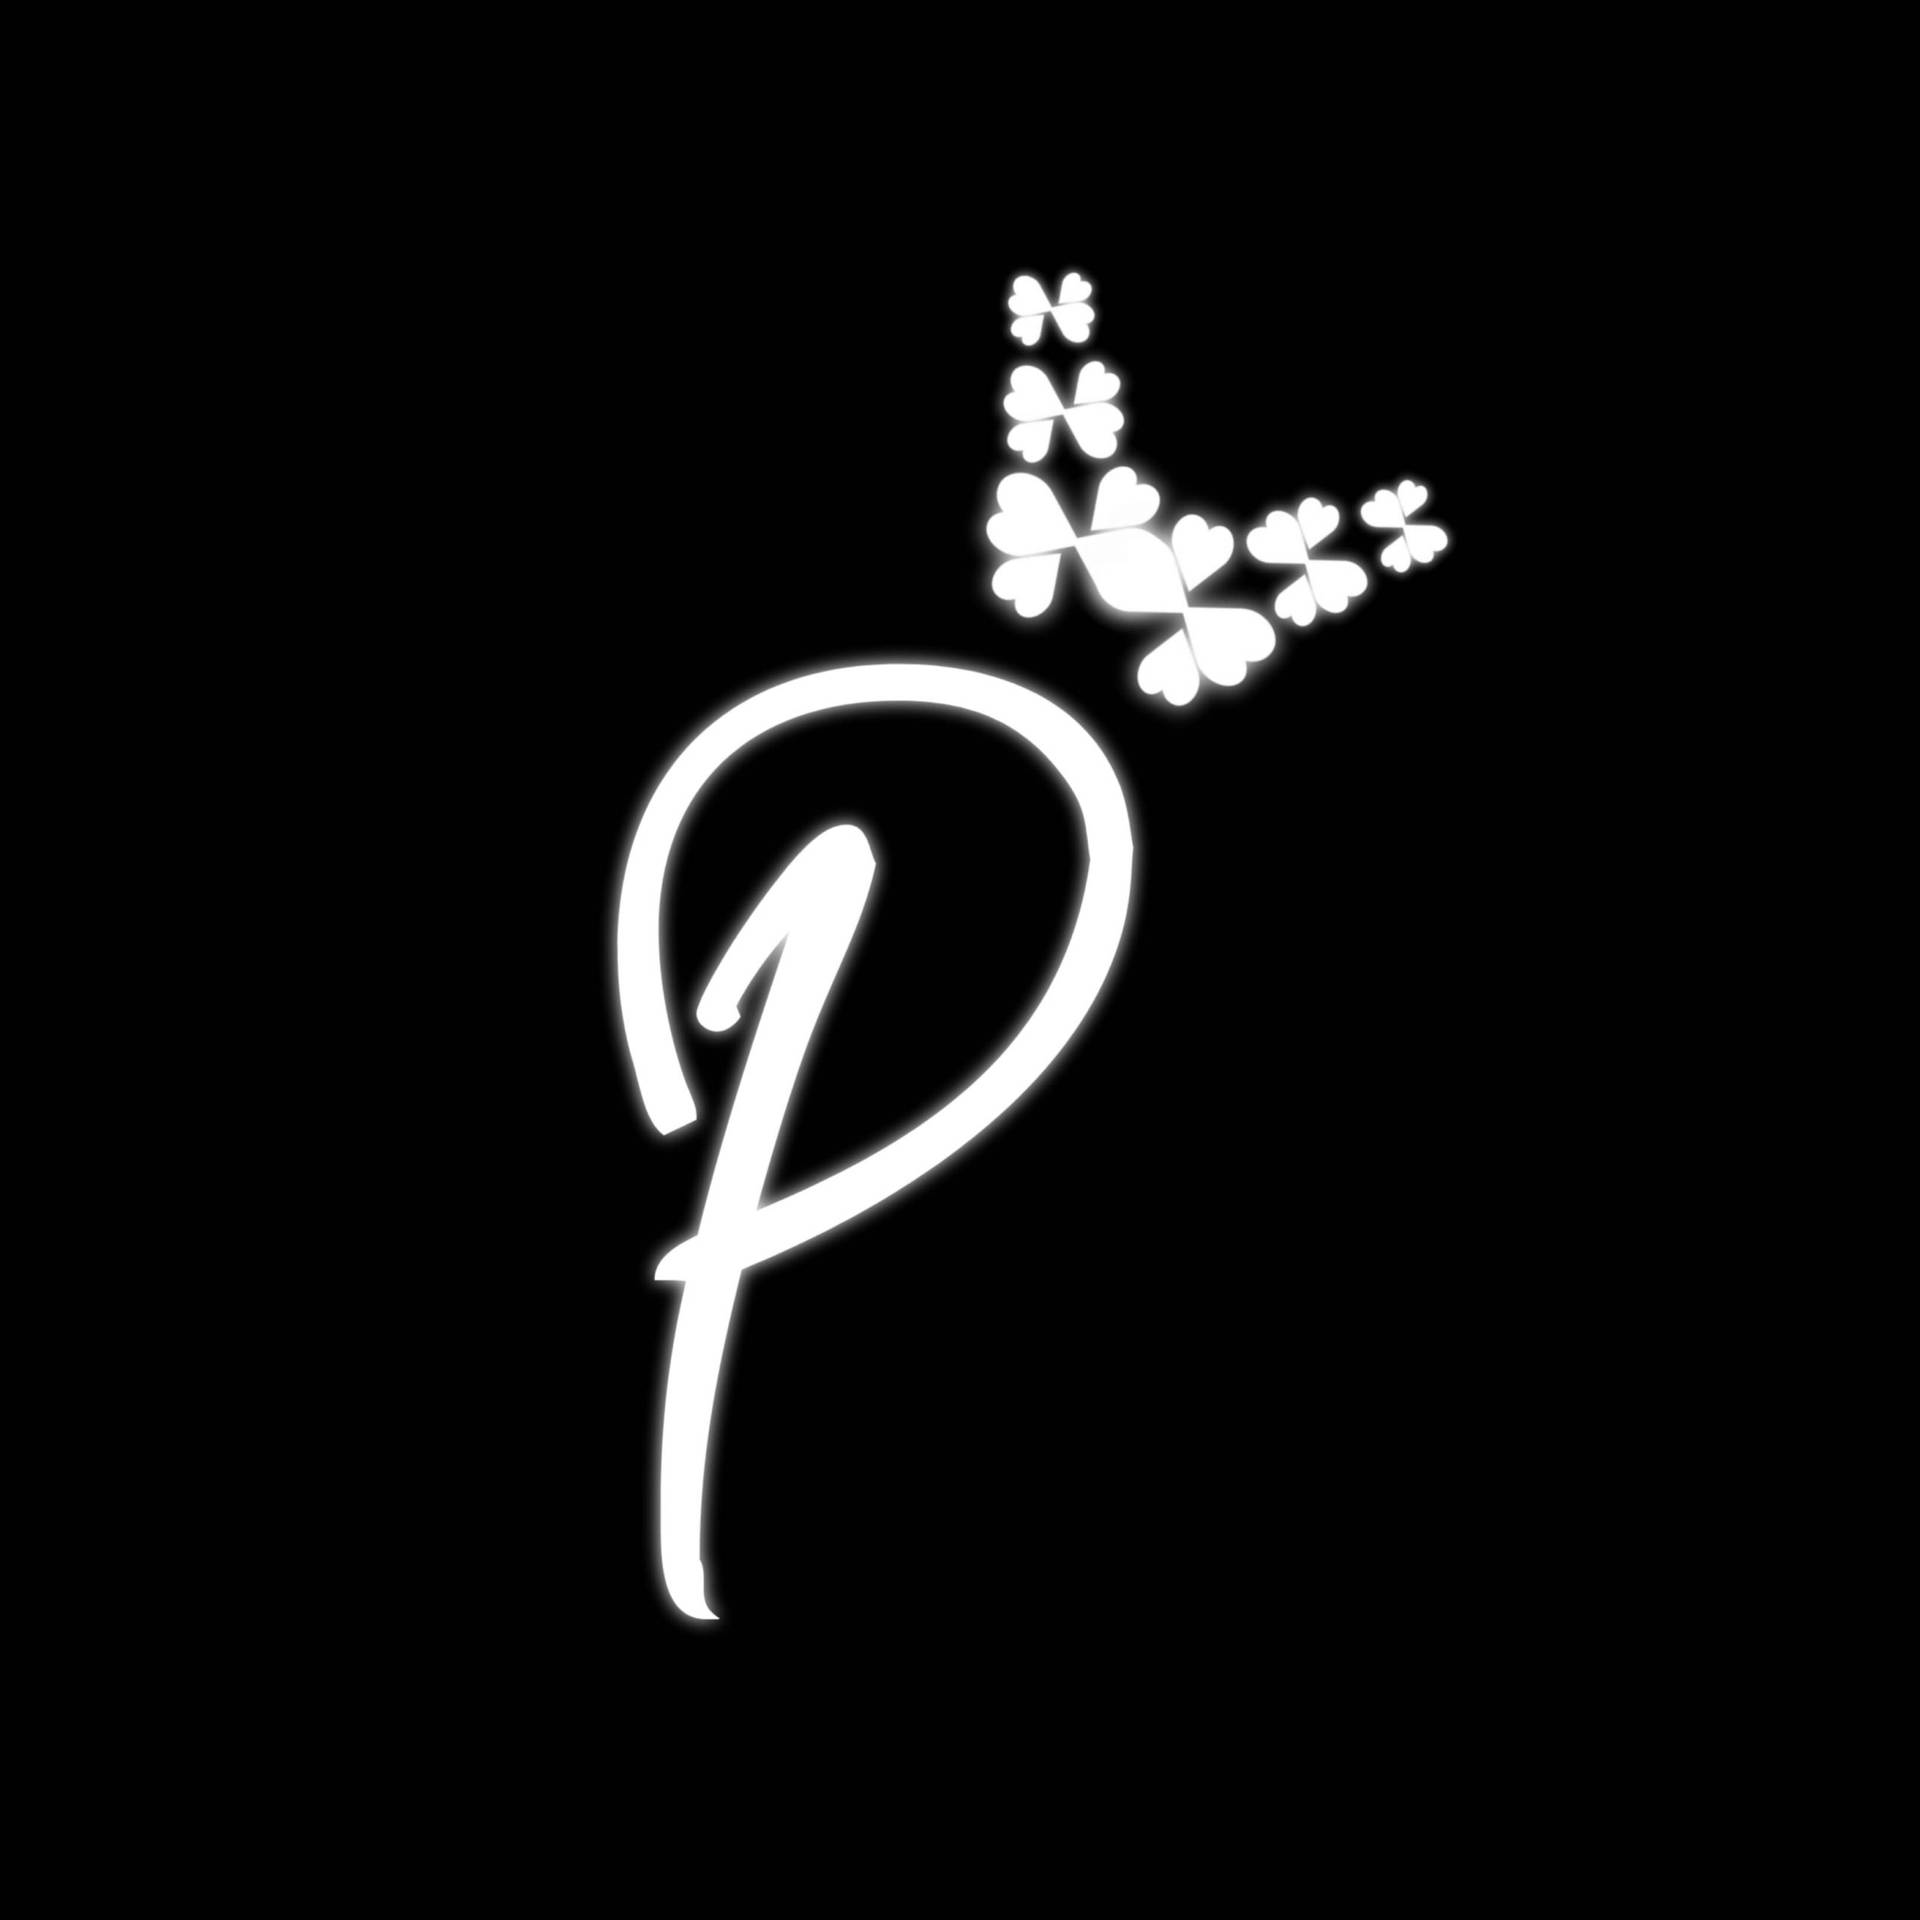 Download Glowing Letter P Wallpaper 